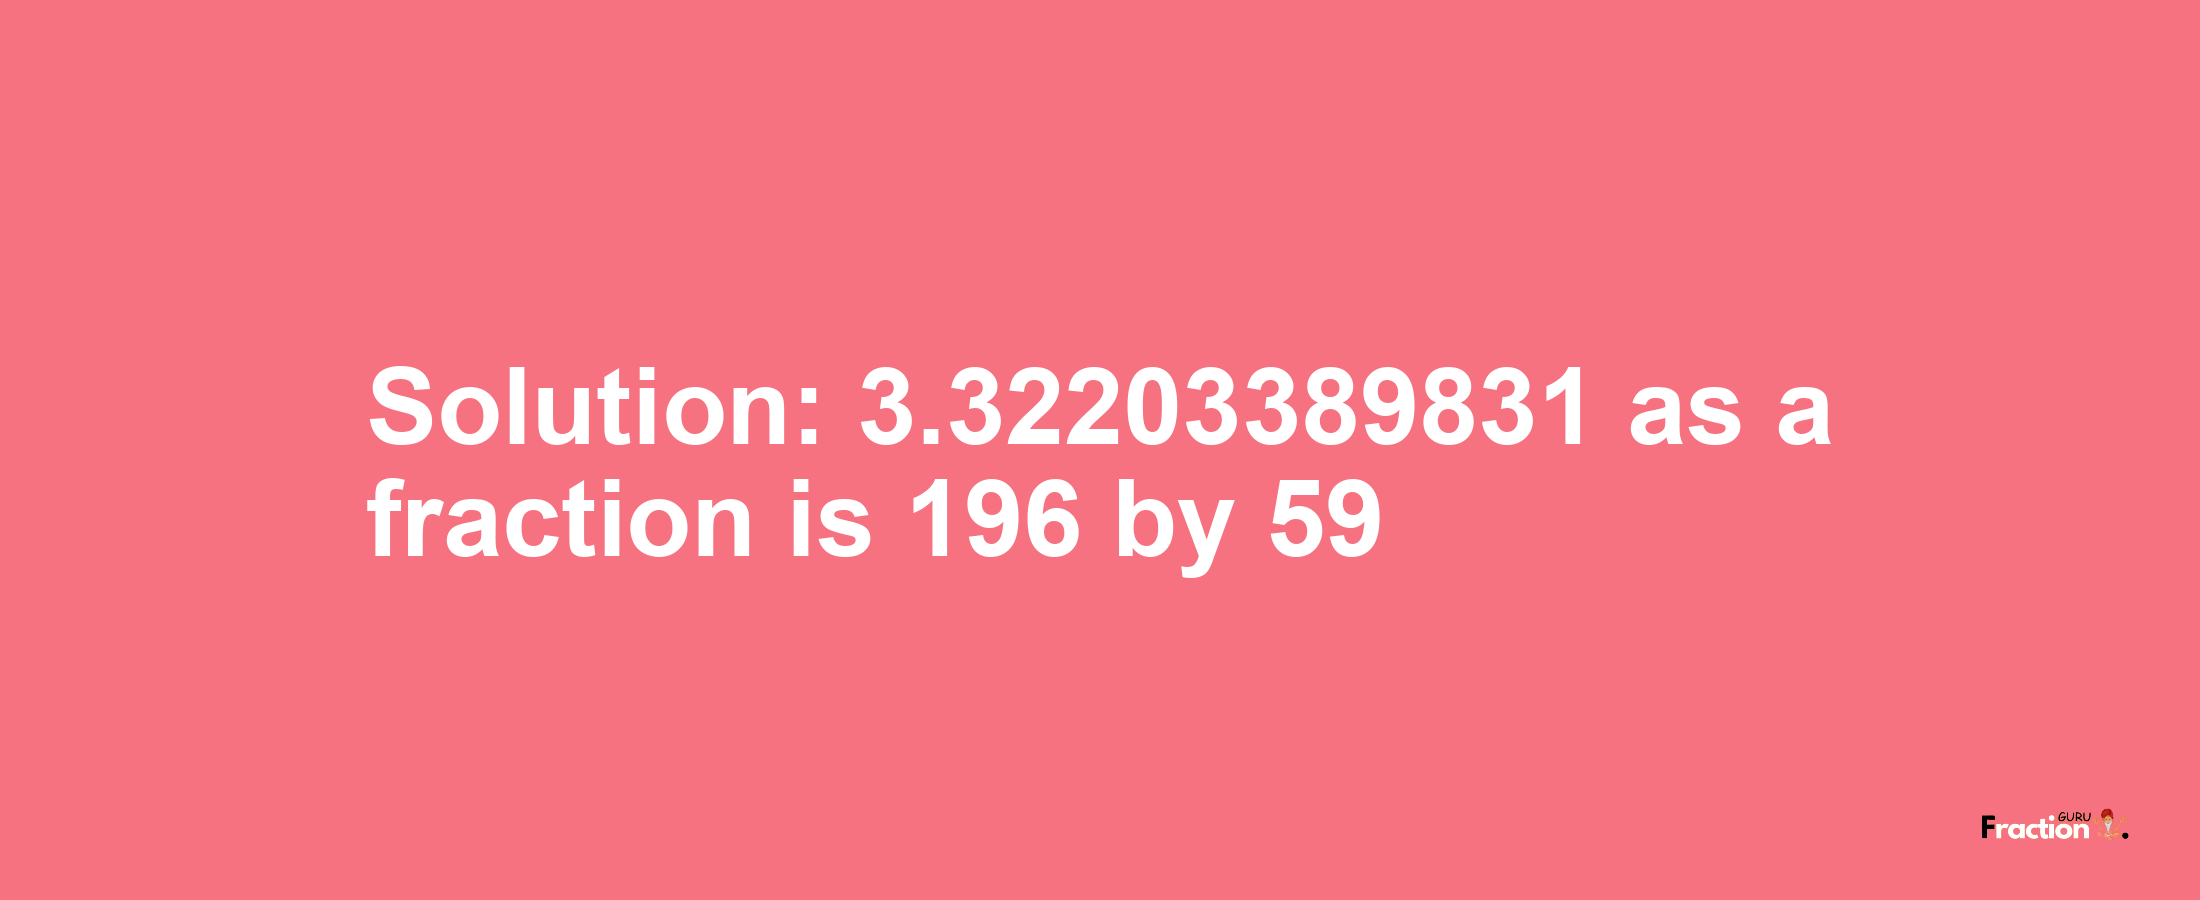 Solution:3.32203389831 as a fraction is 196/59